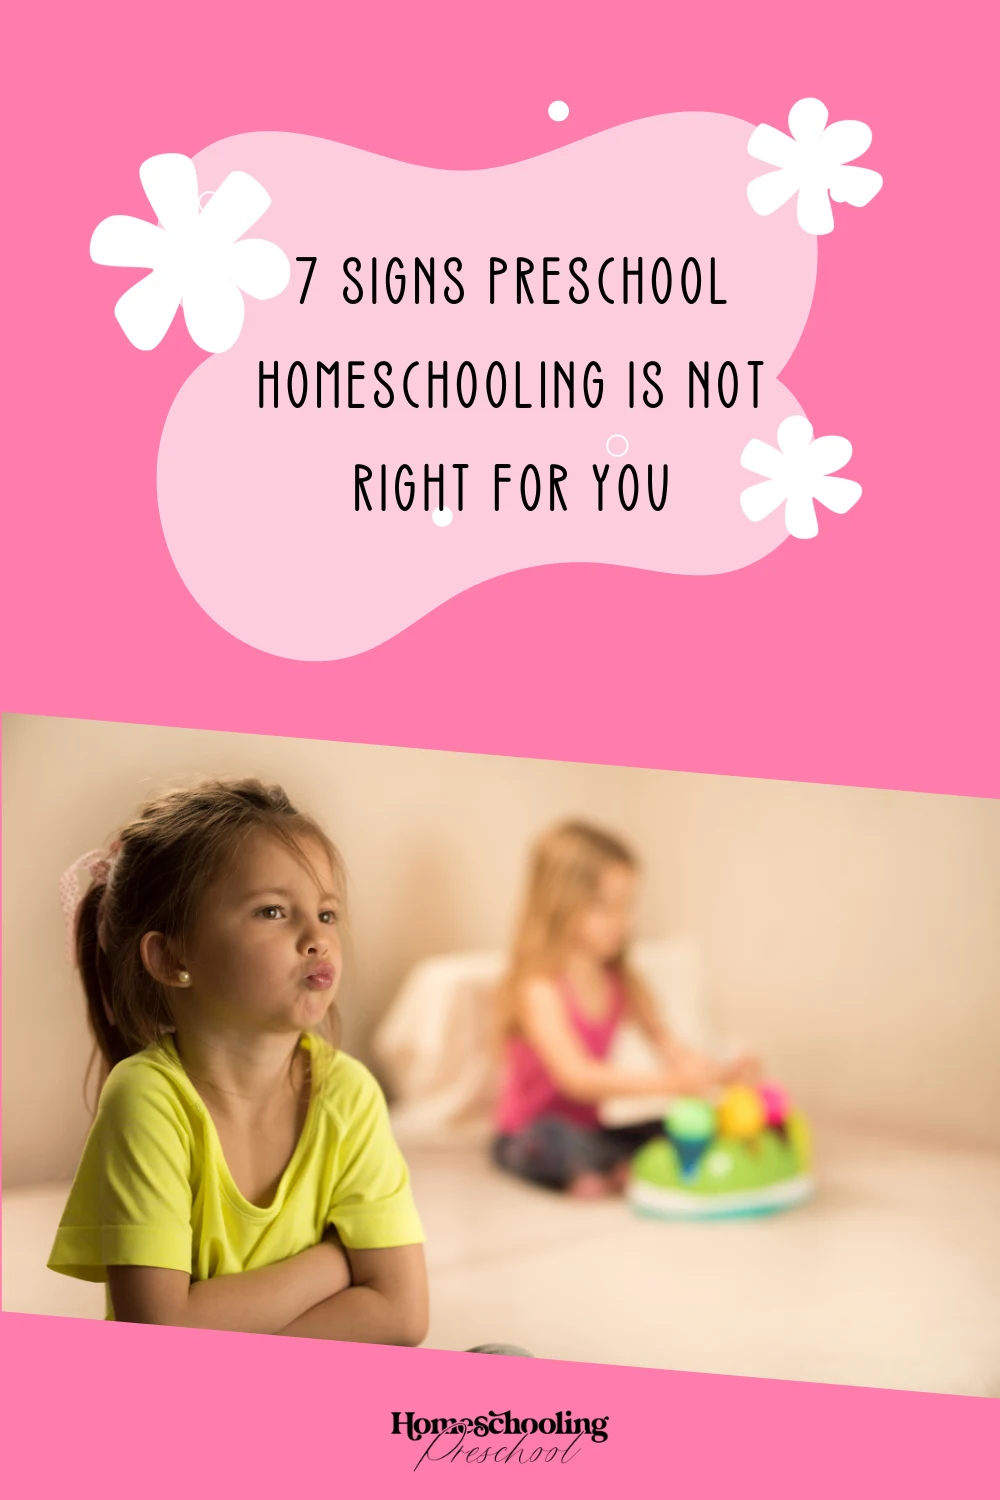 7 Signs Preschool Homeschooling Is Not Right for You